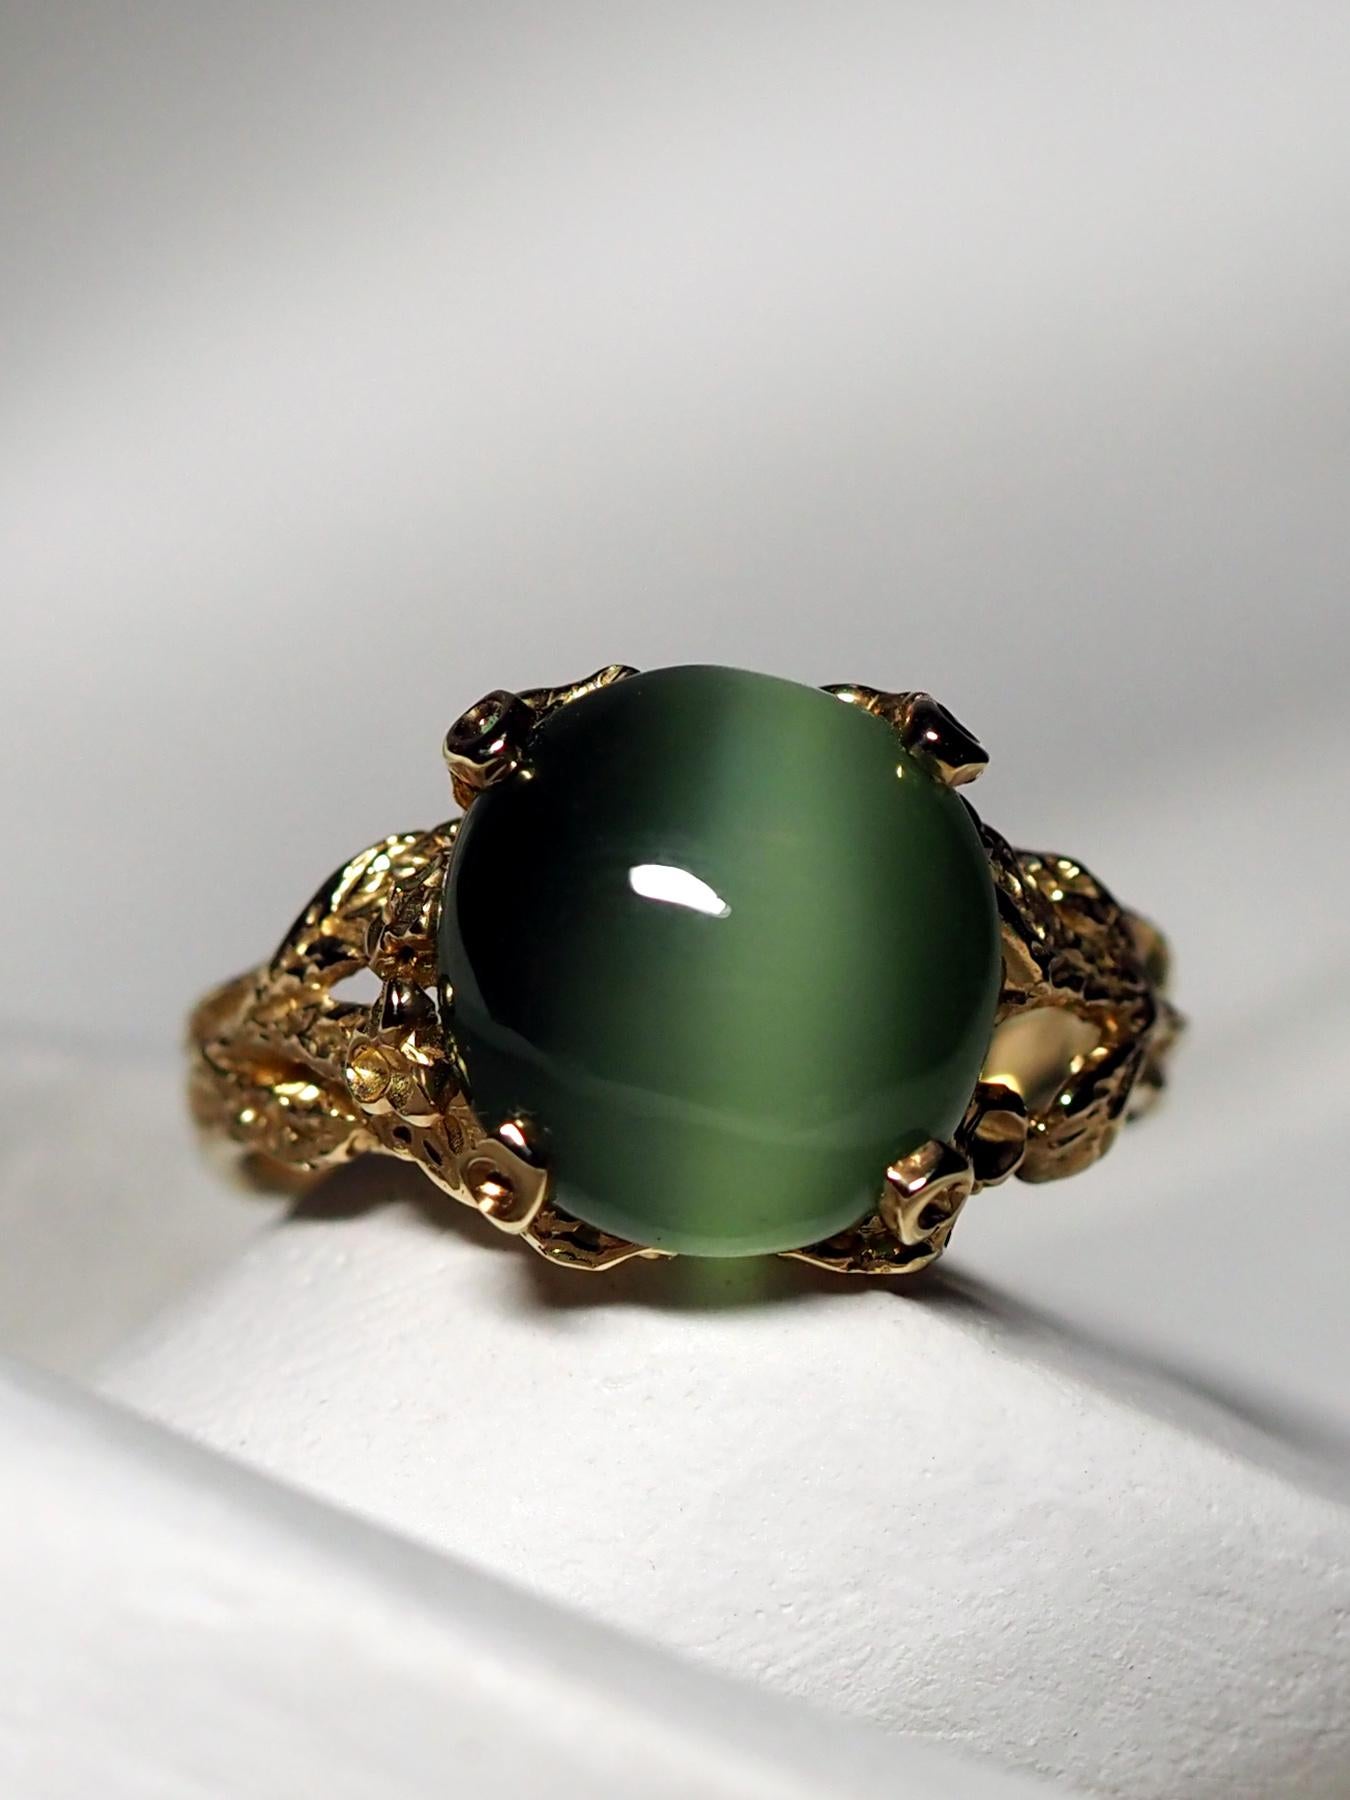 14K yellow gold ring with natural Green Nephrite Jade
stone weight - 5.80 carats
stone measurements - 0.31 х 0.43 х 0.47 in / 8 х 11 х 12 mm
ring size - 6.5 US (we can resize)
ring weight - 5.39 grams


We ship our jewelry worldwide – for our